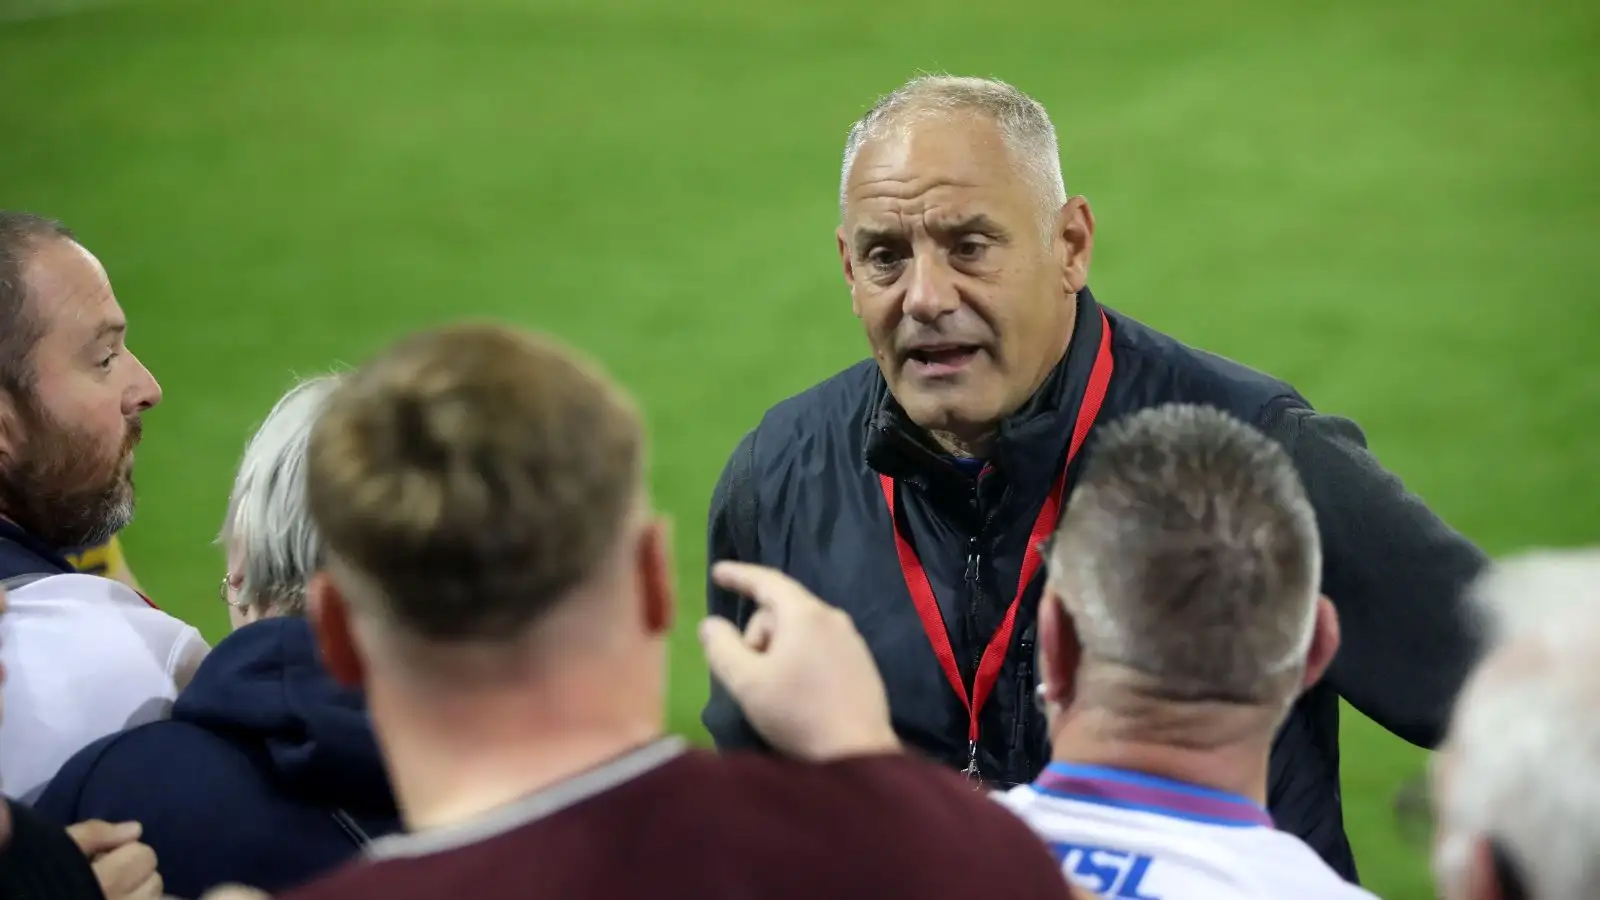 Outgoing Wakefield Trinity CEO urges fans to stick with club following relegation: ‘We’ve got a chance now to reset’